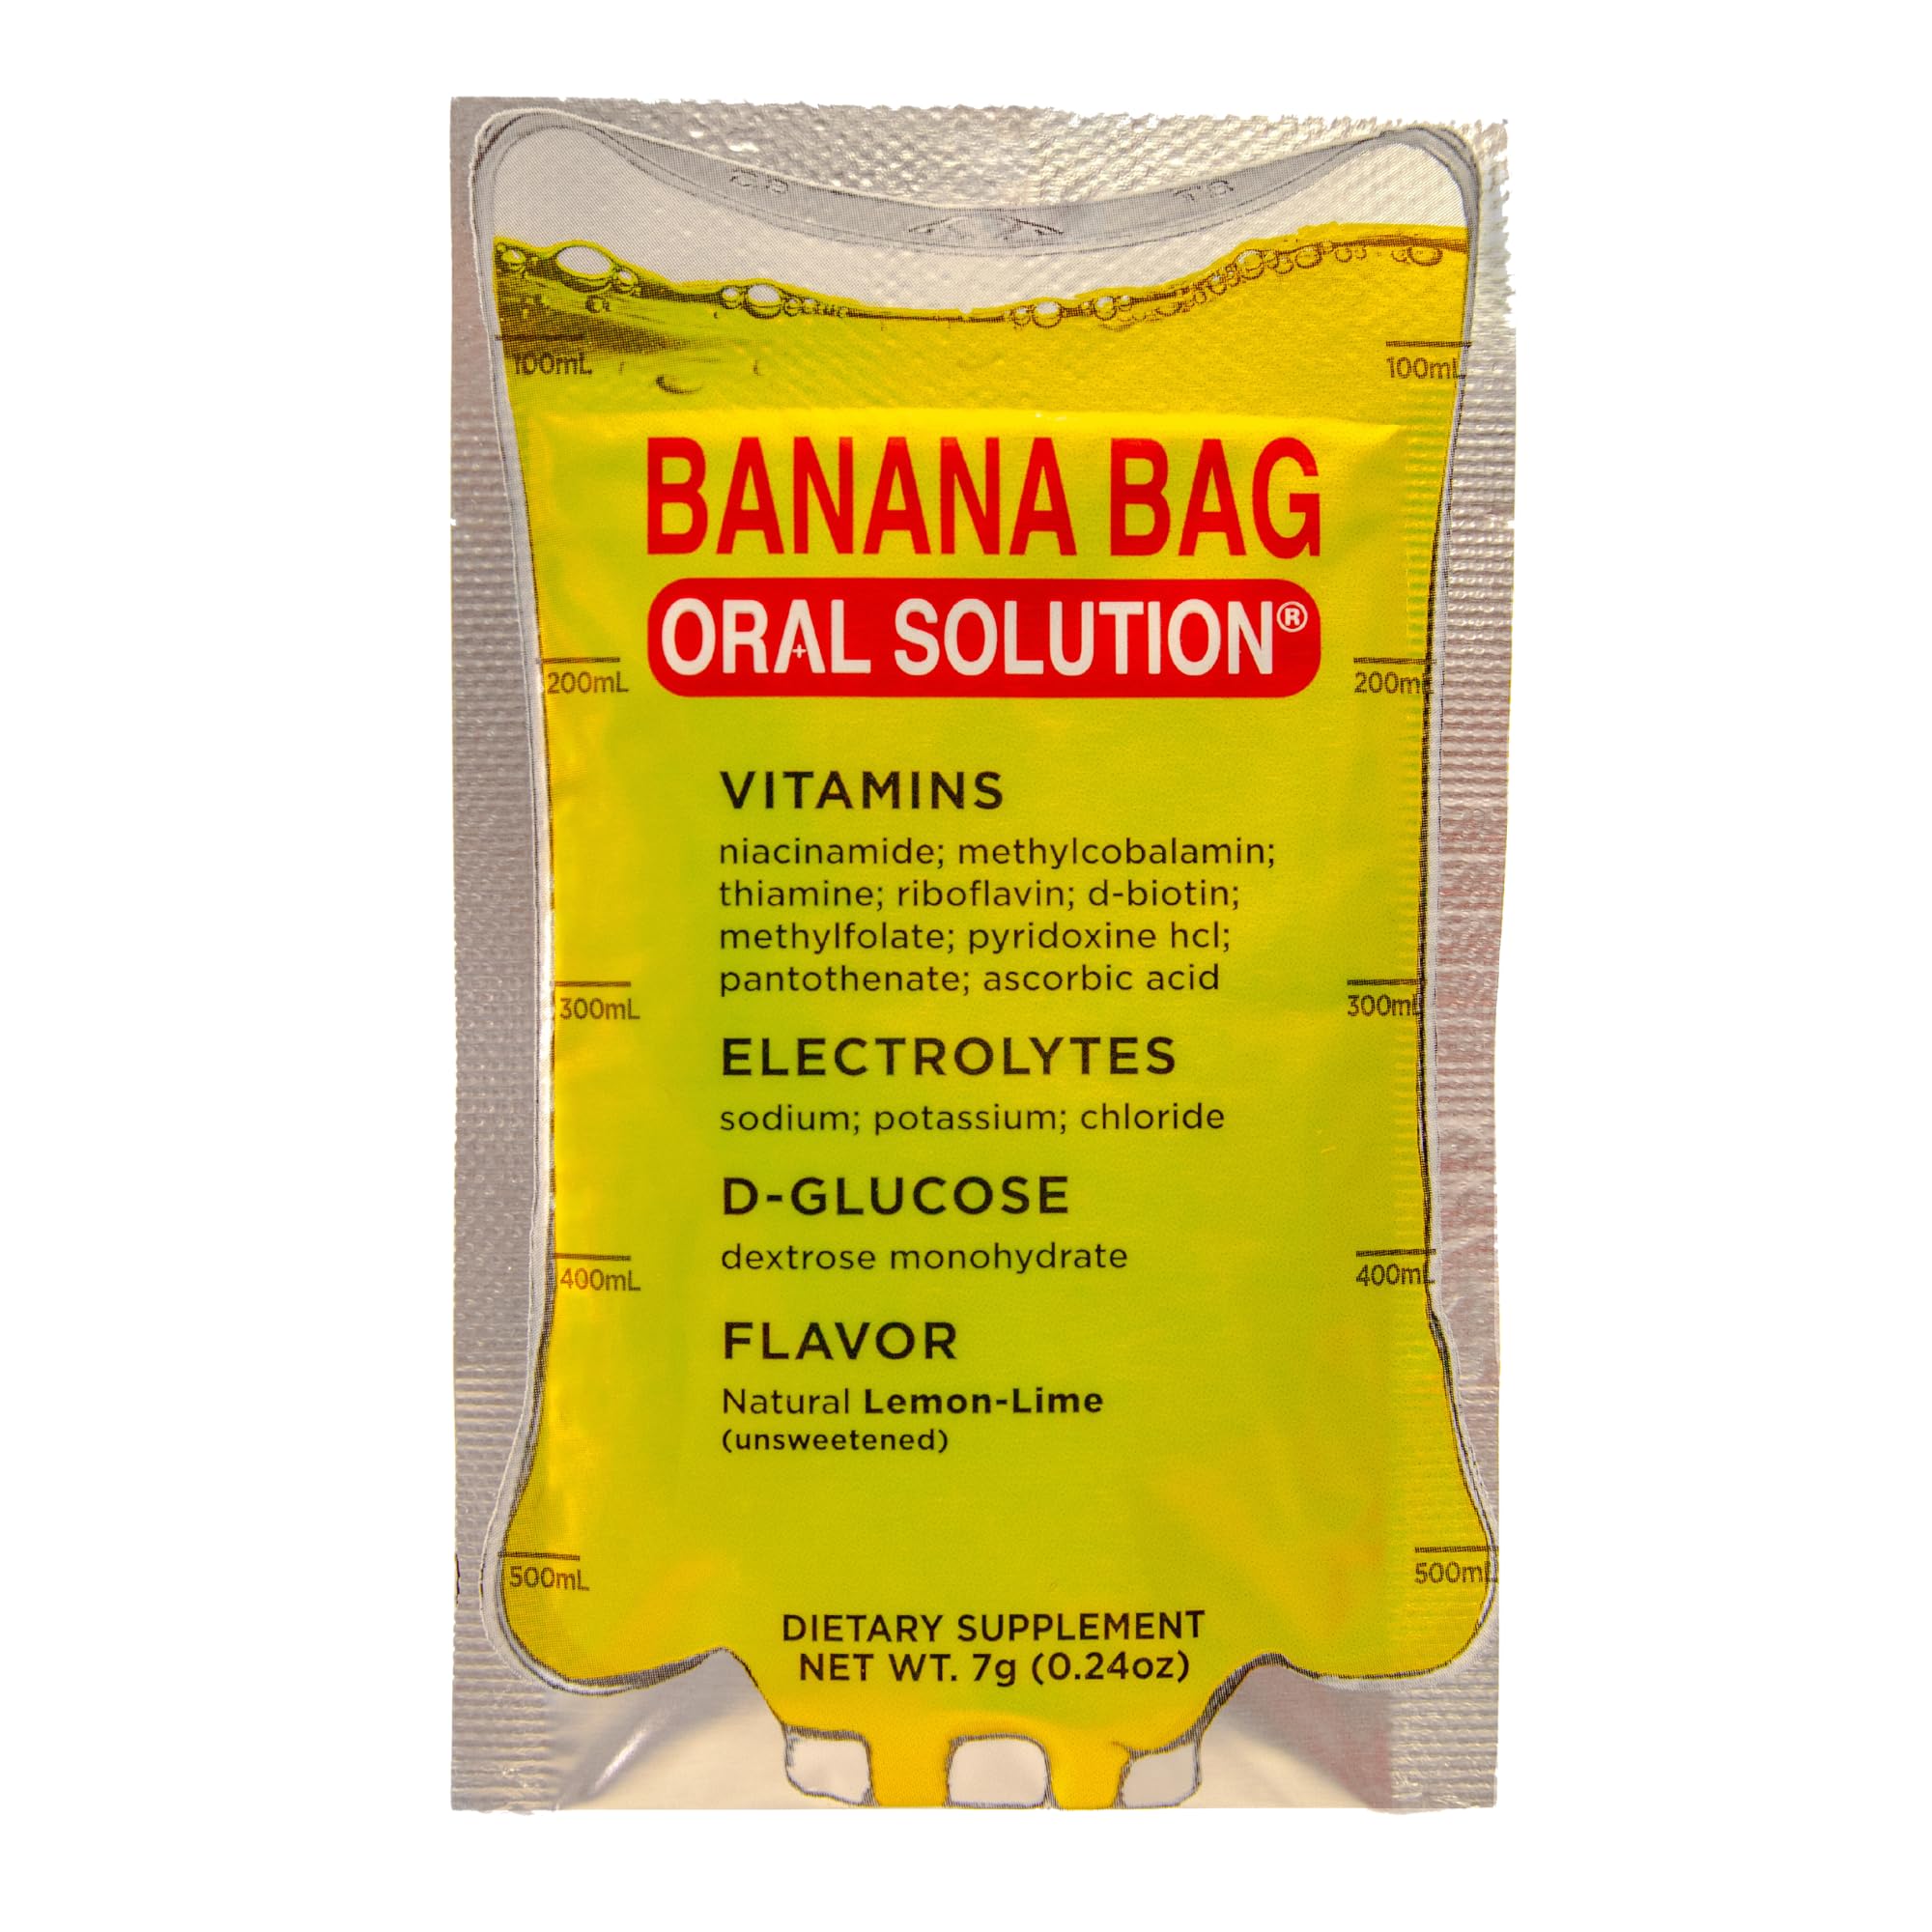 The Banana Bag: What It Is and Why You Need It | AZ IV Medics